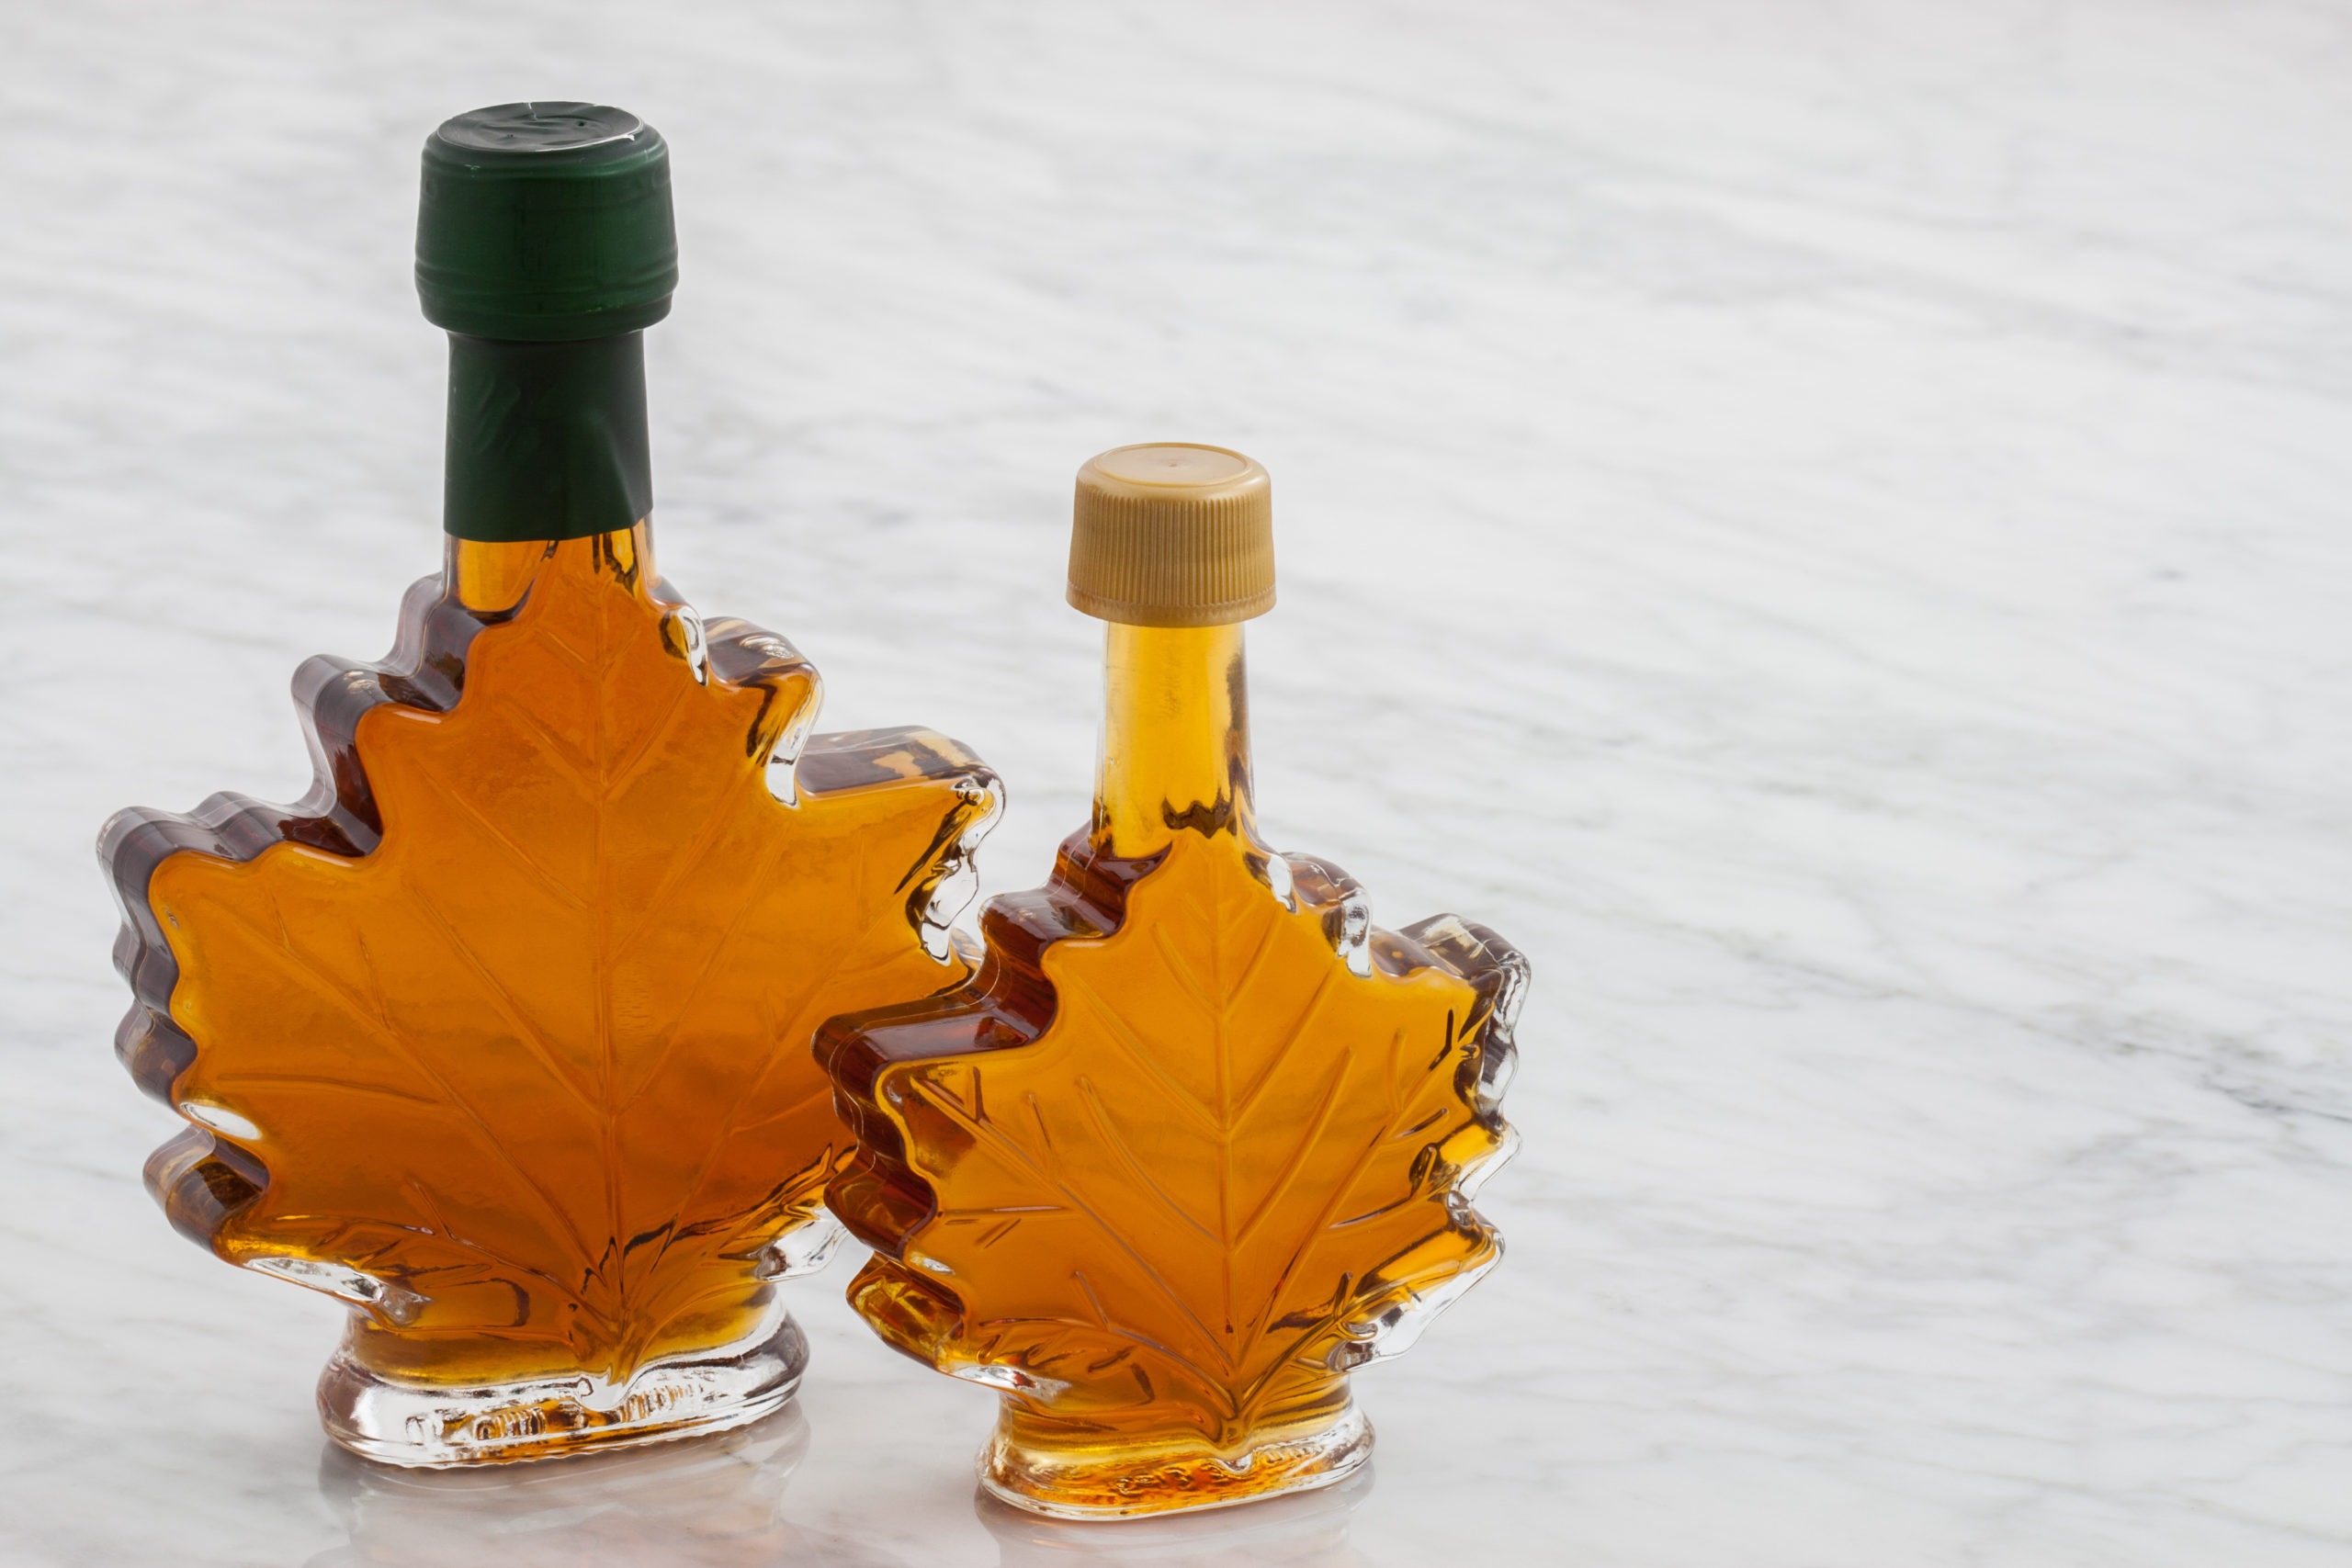 Vermont – Maple syrup